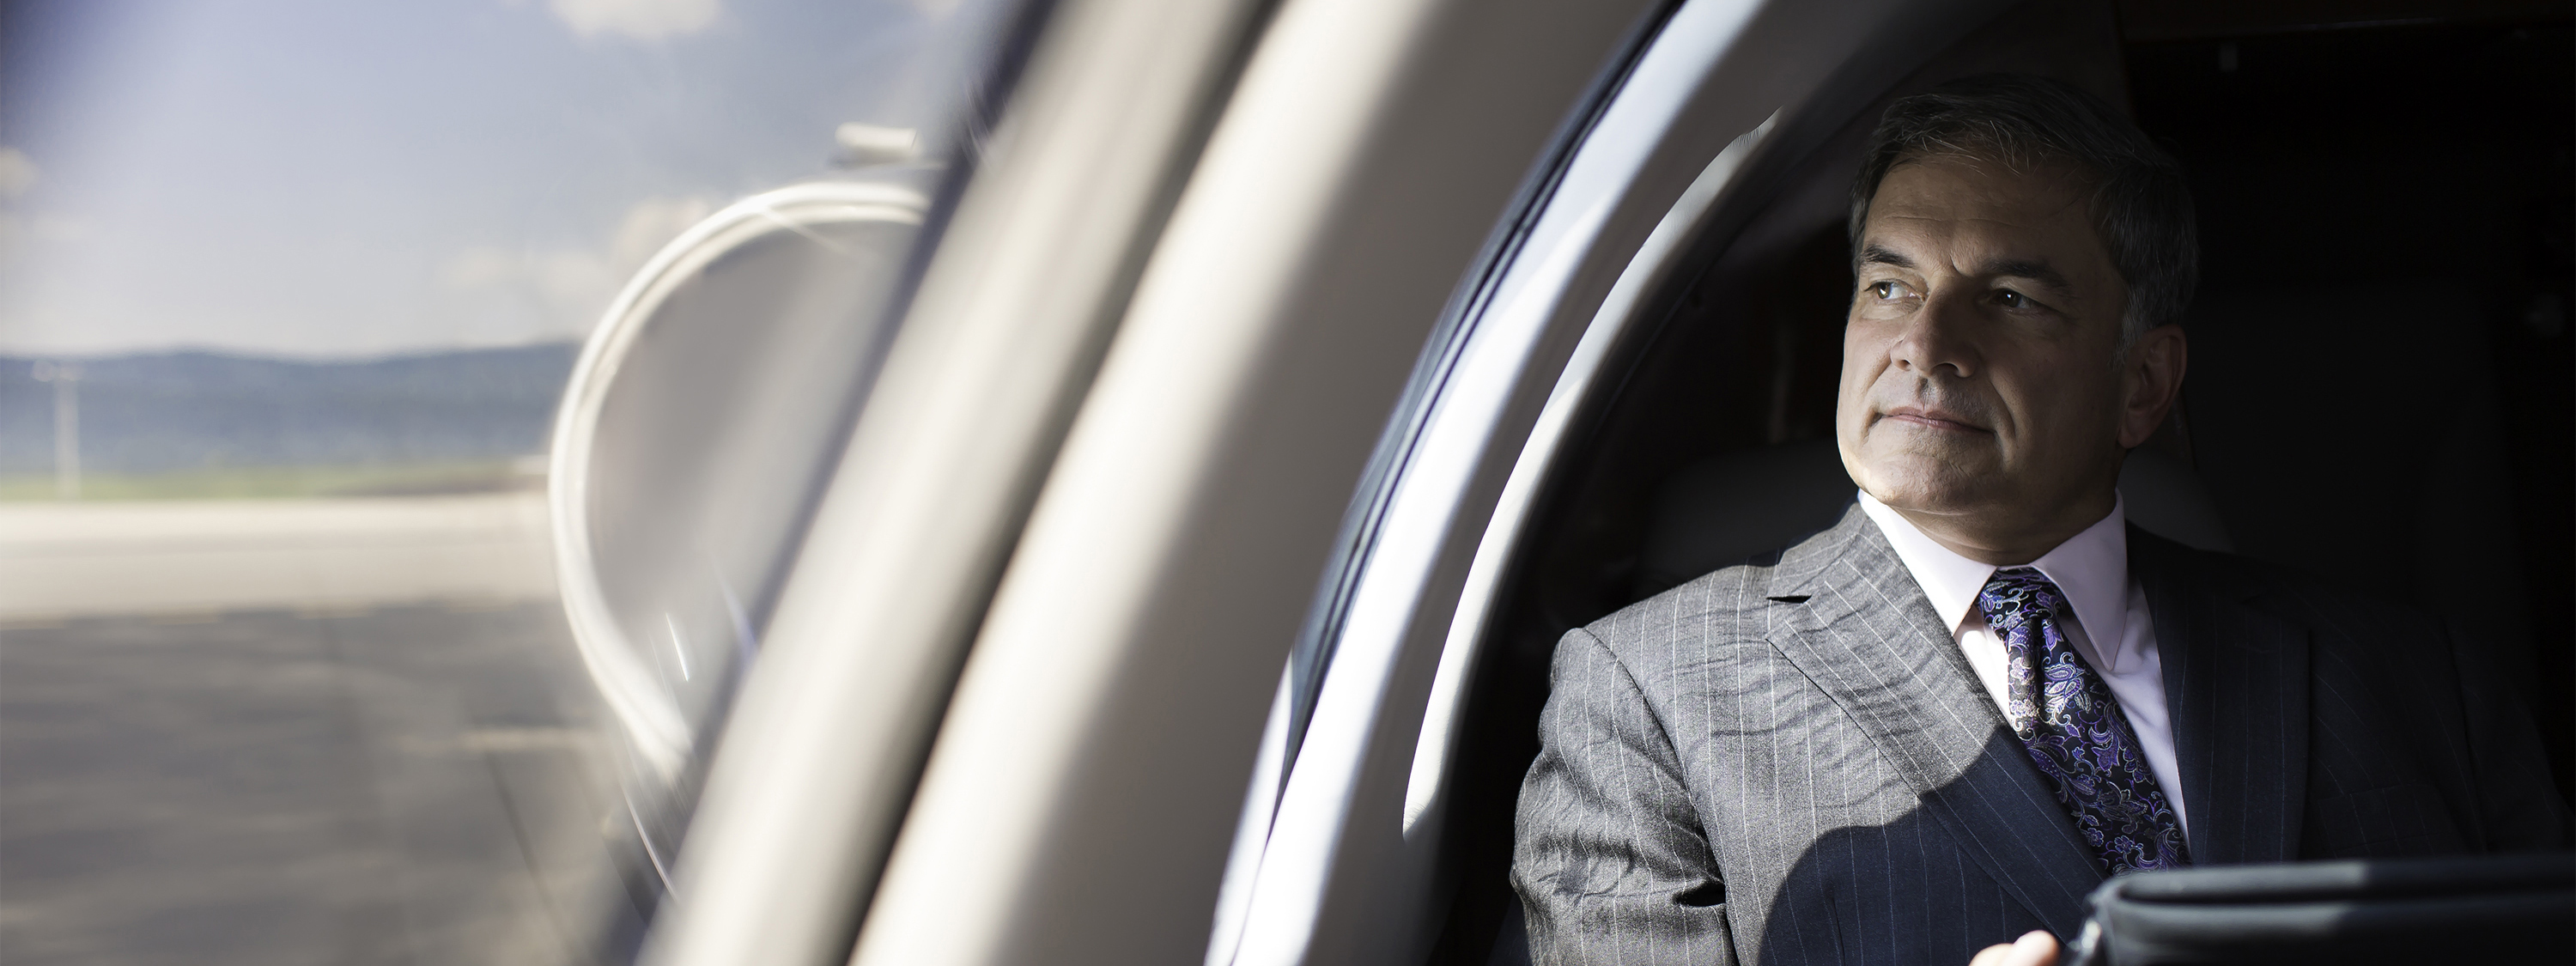 Business leader flying on private plane